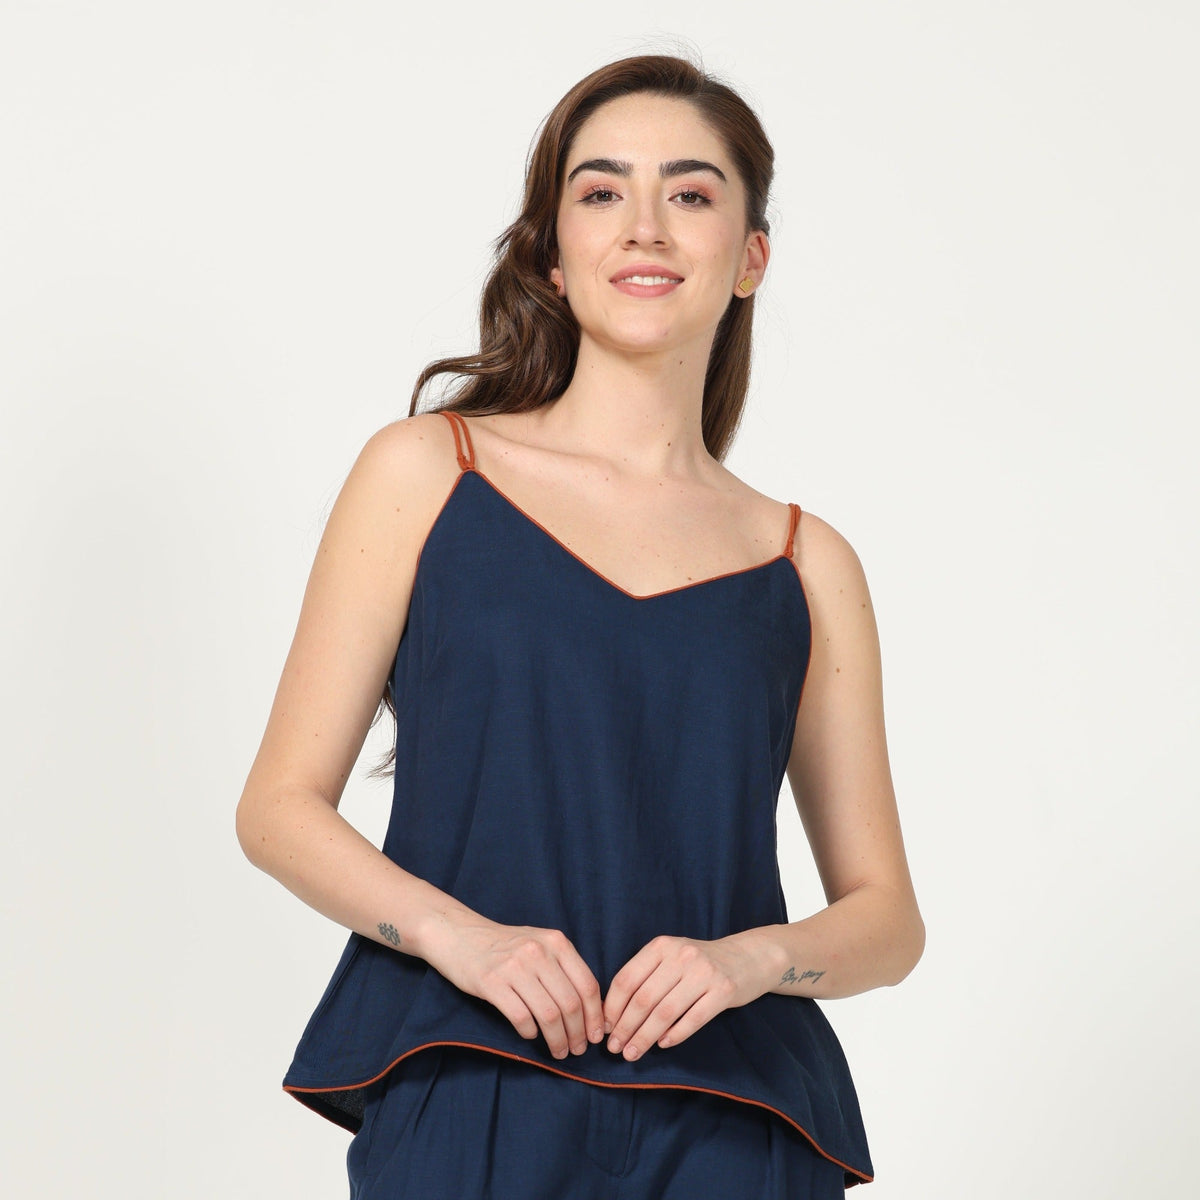 Oh Slip Top - Navy Blue With Contrast Edging - Limited Edition